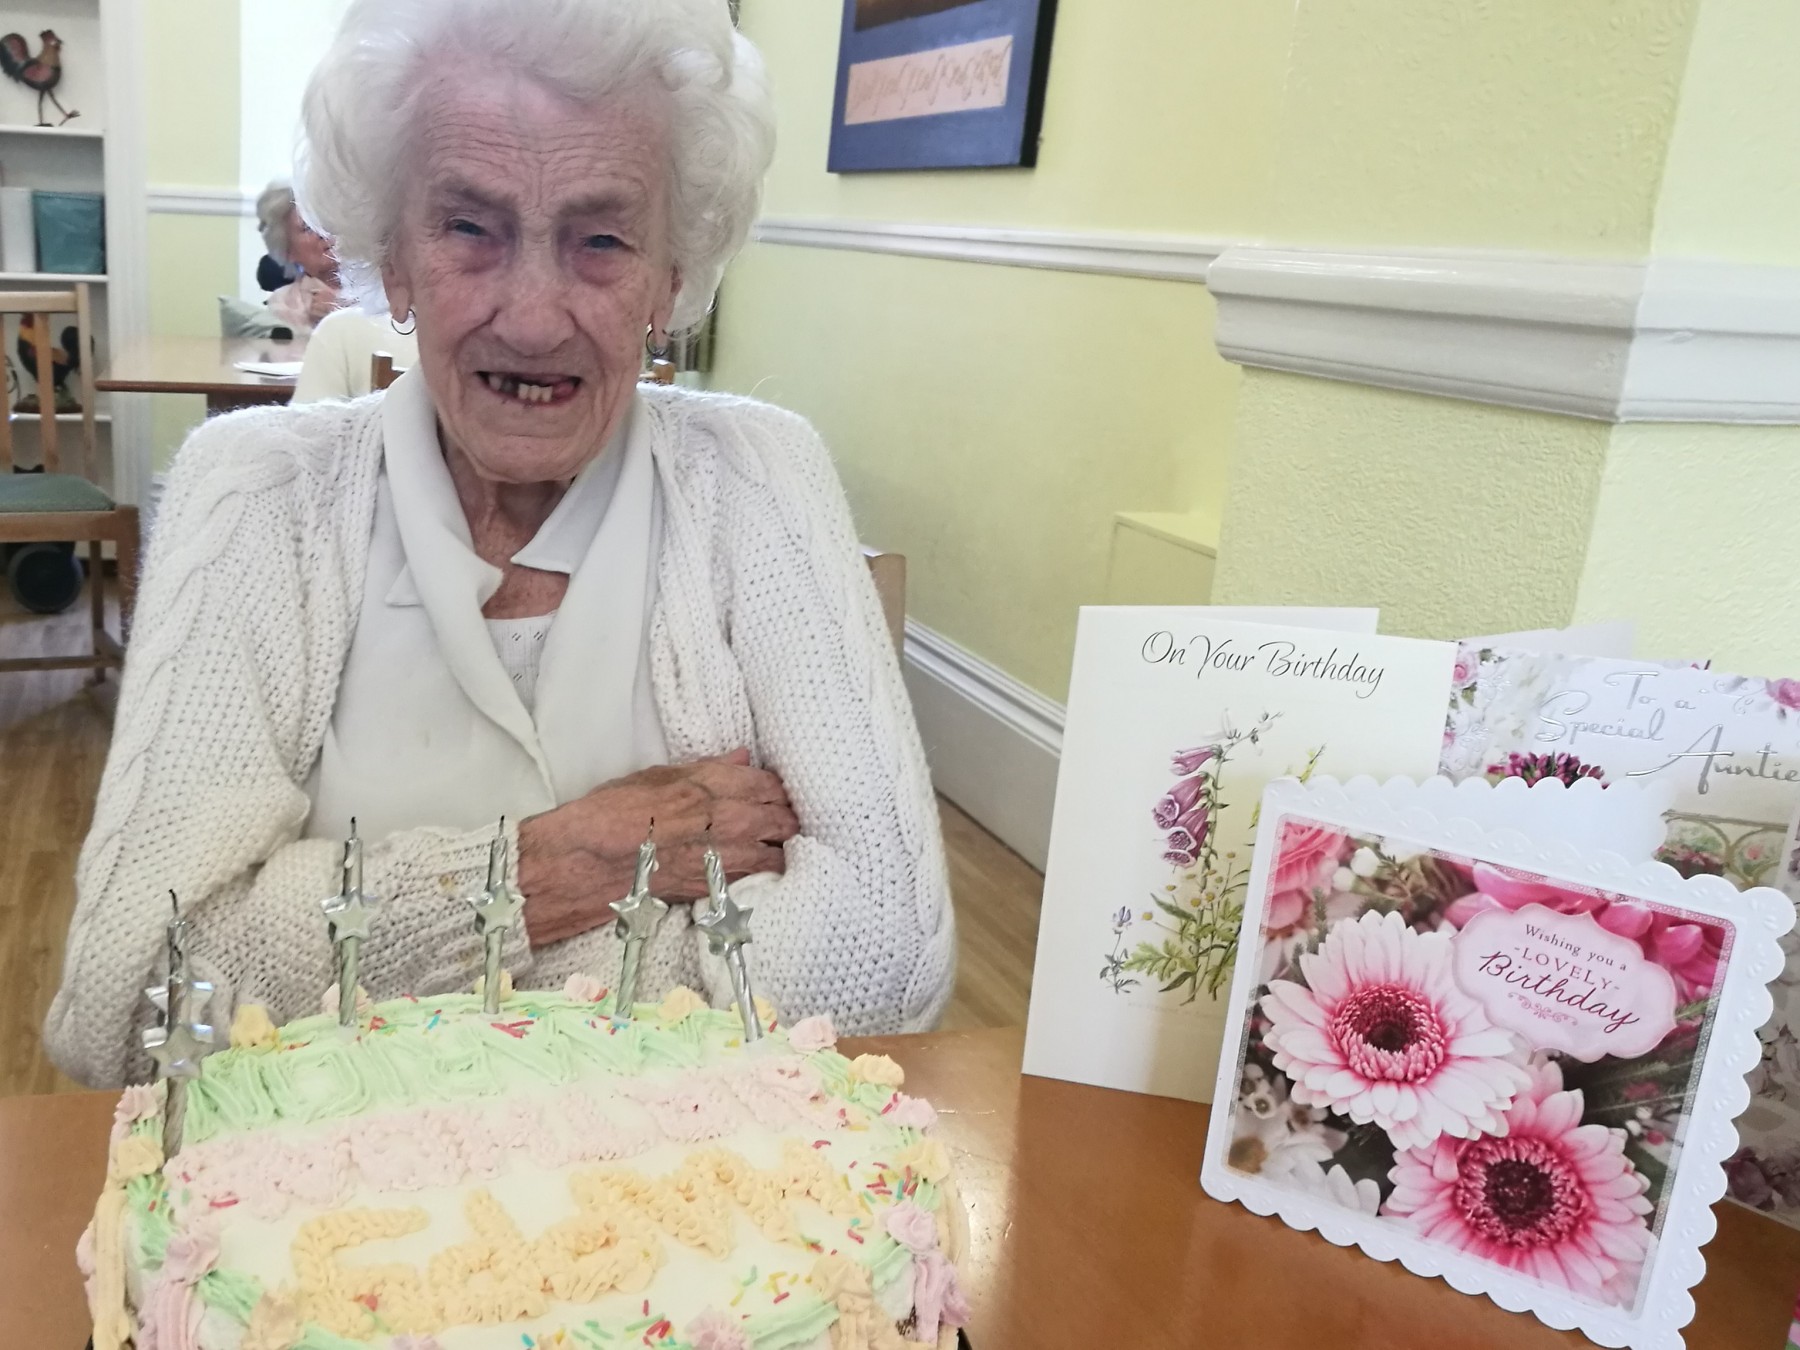 Marion turns 97